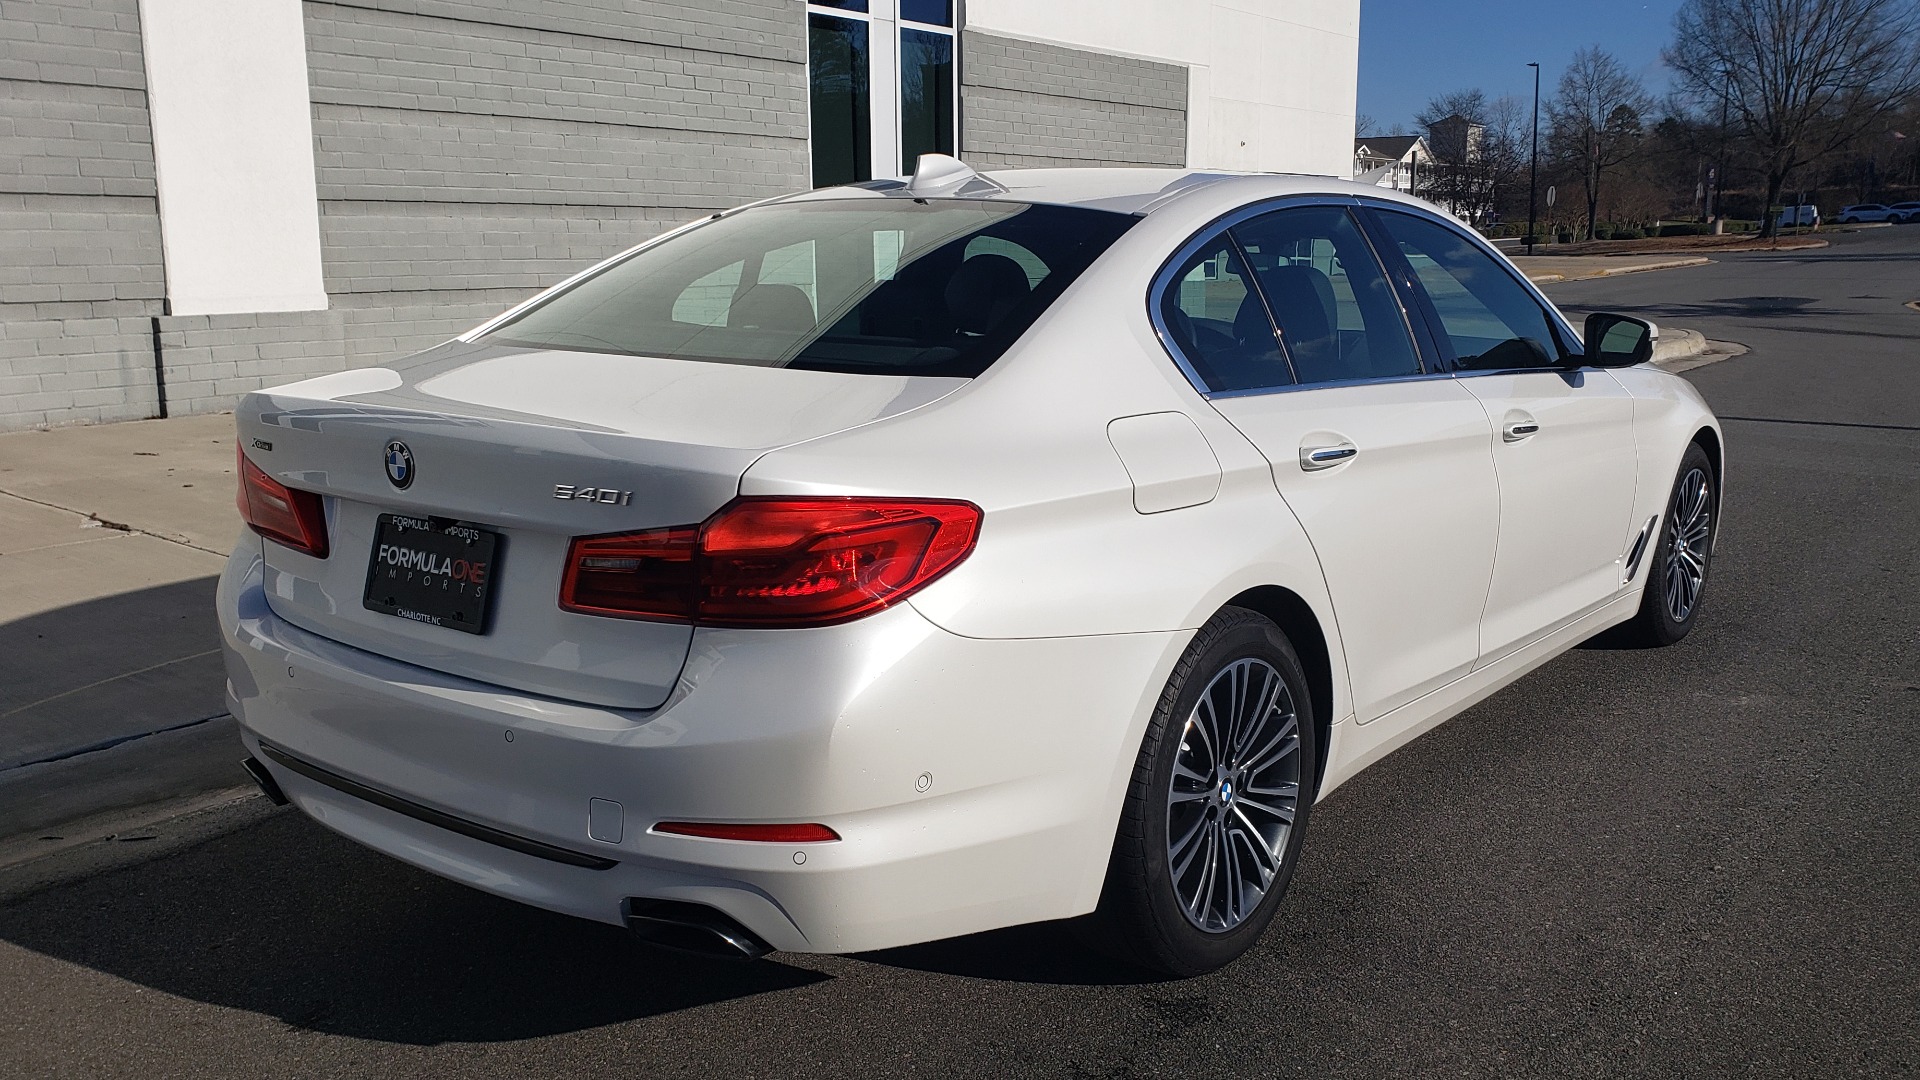 Used 2017 BMW 5 SERIES 540I XDRIVE PREMIUM / NAV / DRVR ASST / CLD WTHR / REARVIEW for sale Sold at Formula Imports in Charlotte NC 28227 7